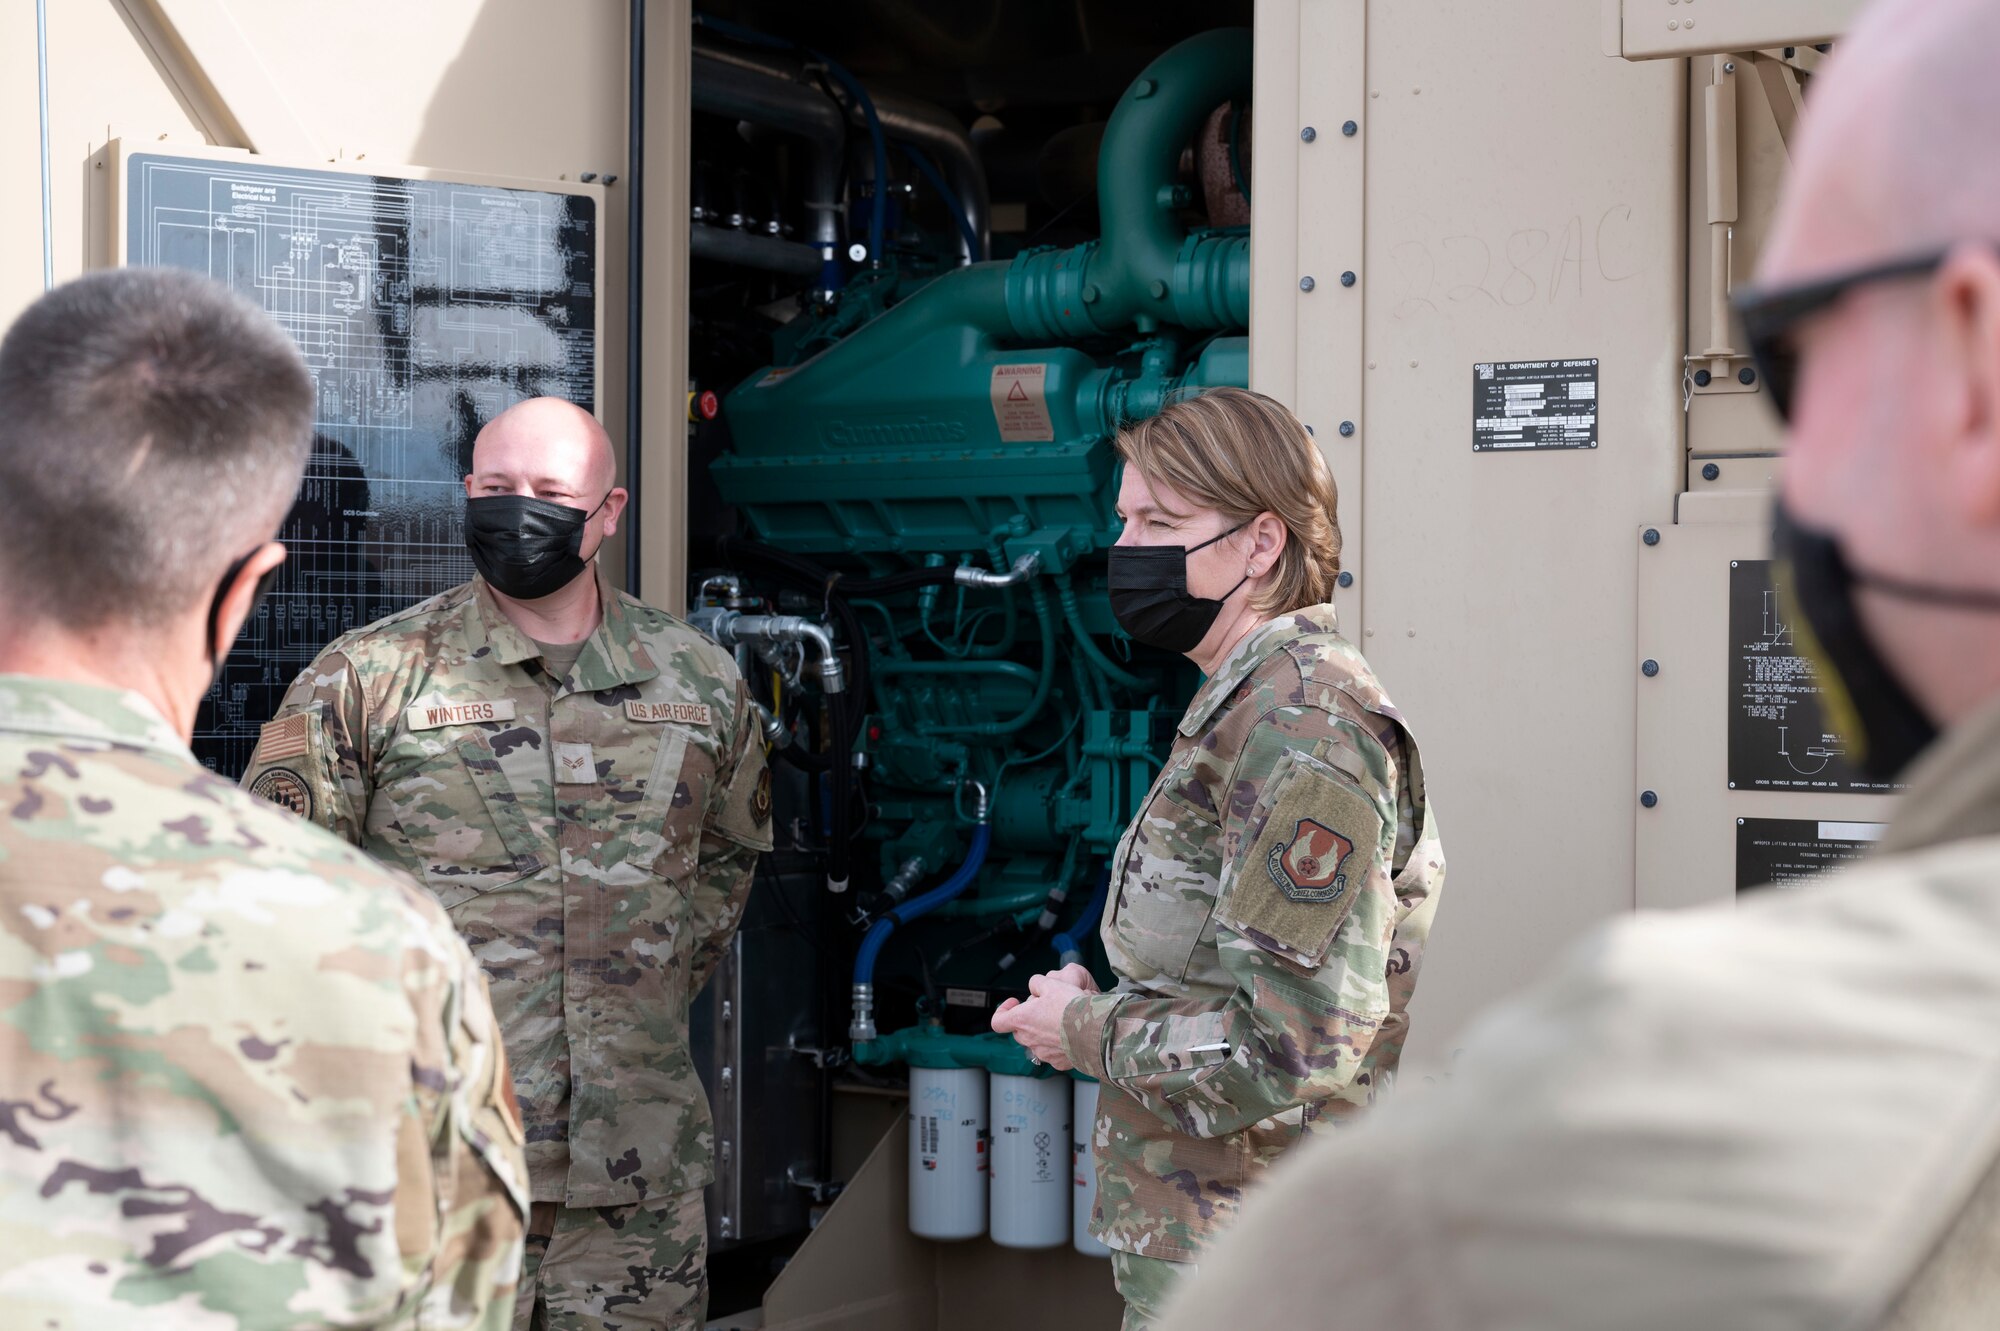 Maj. Gen. Constance McCauley von Hoffman, U.S. Air Force Materiel Command logistics director, and Senior Airman Jonathan Winters, 635th Materiel Maintenance Group electrical power production journeyman, take a deeper look at a Bear Power Unit (BPU) during a familiarization tour at the Basic Expeditionary Airfield Resources (BEAR) base, Dec. 09, 2021, on Holloman Air Force Base, N.M. The BPU generator is a portable power source that is used on Air Force expeditionary bases. (U.S. Air photo by Airman 1st Class Antonio Salfran)